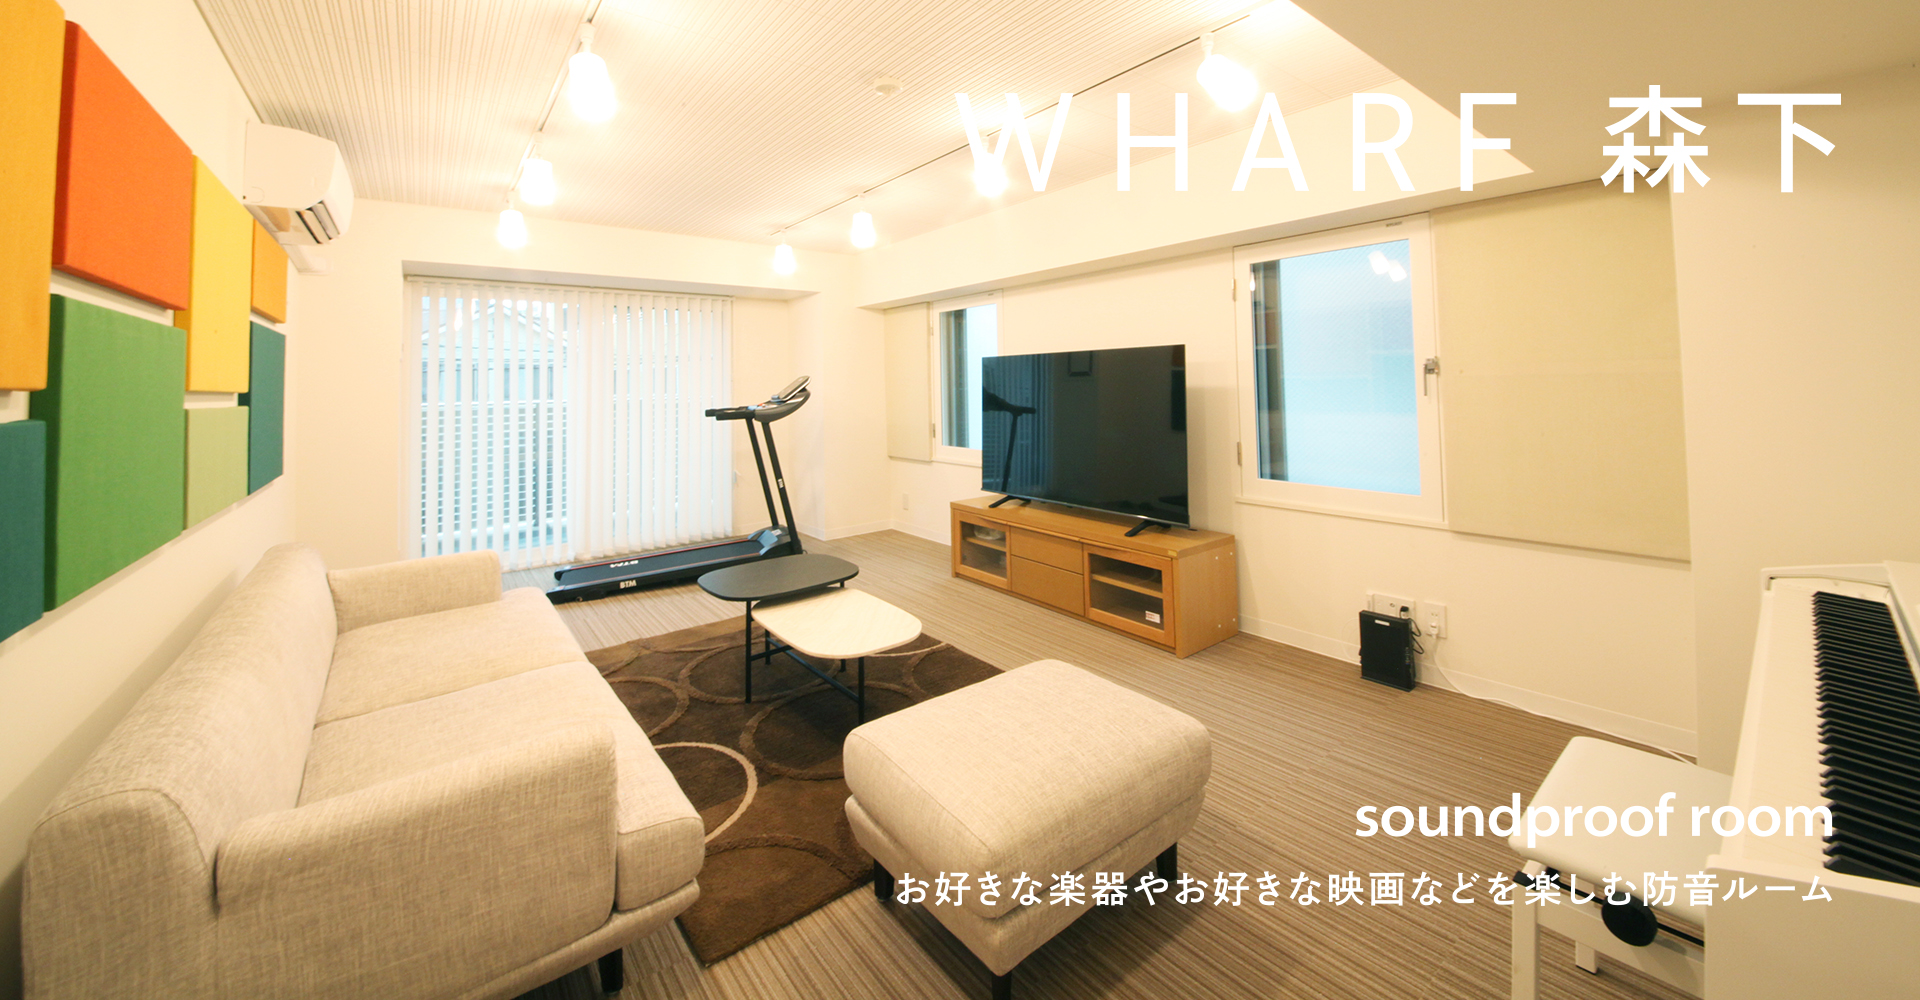 soundproof room 完成予想図